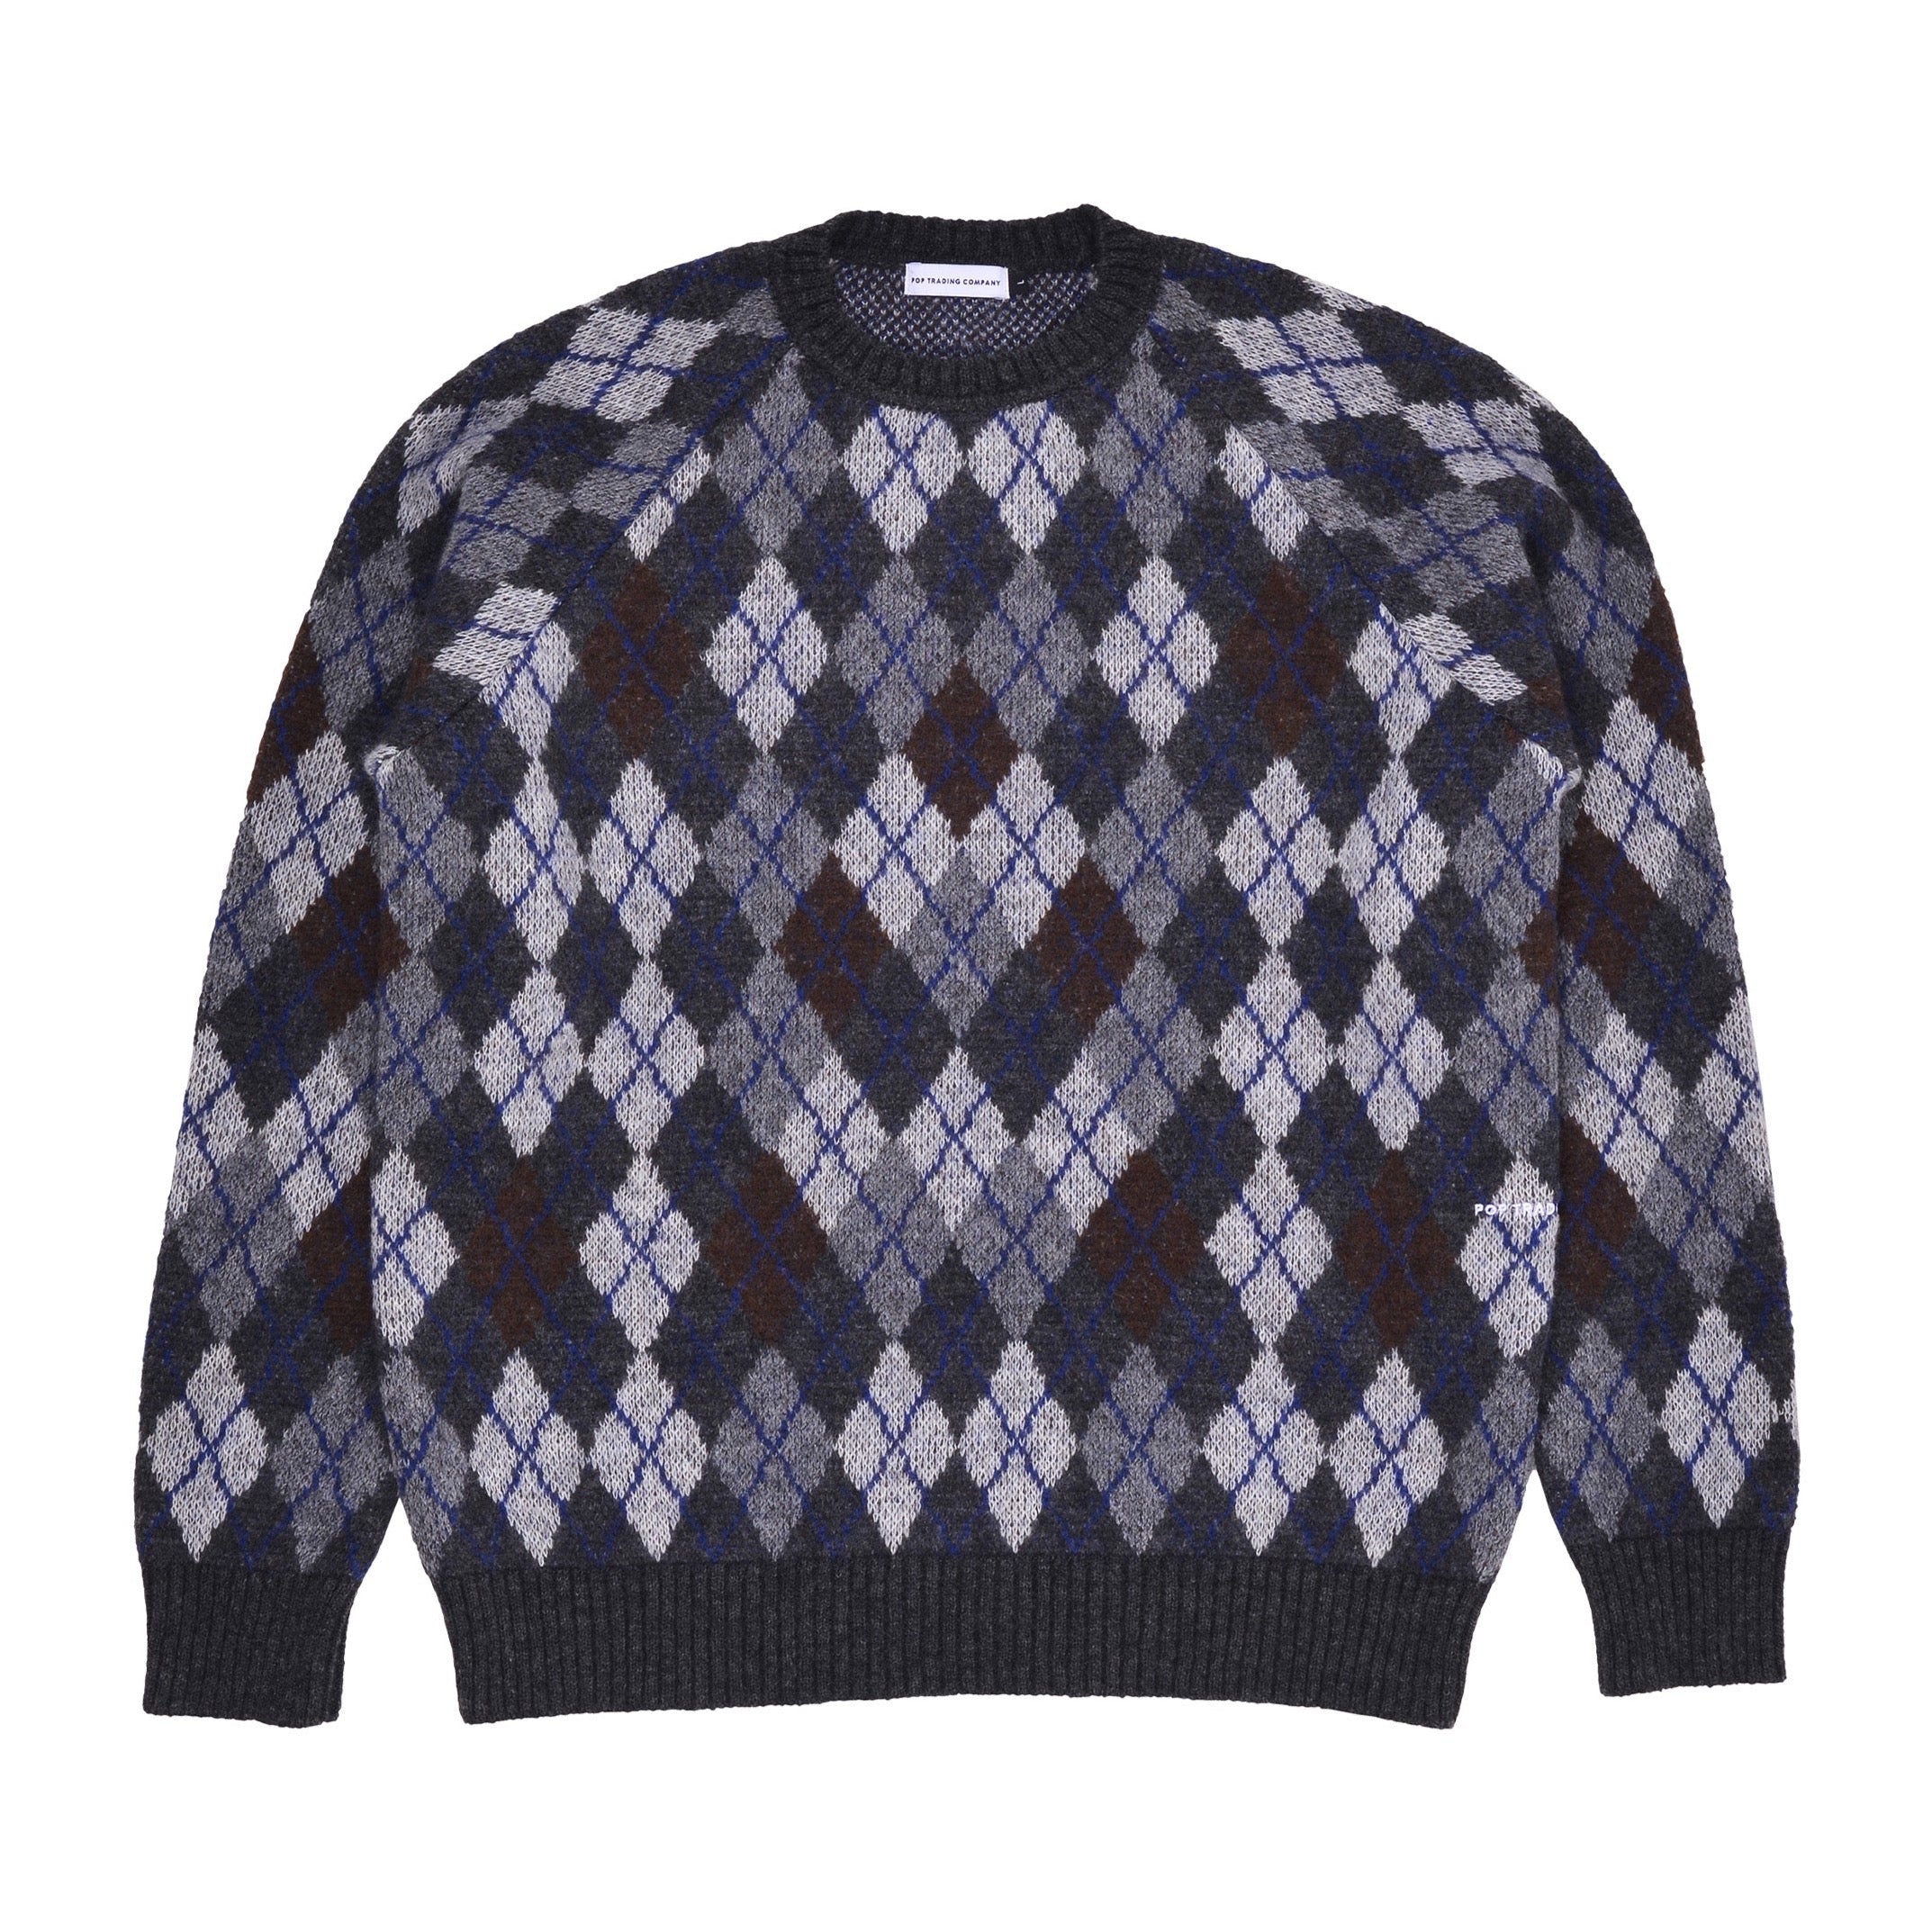 Pop Trading Company - Pop Trading Co - Burlington Knitted Crewneck - Anthracite